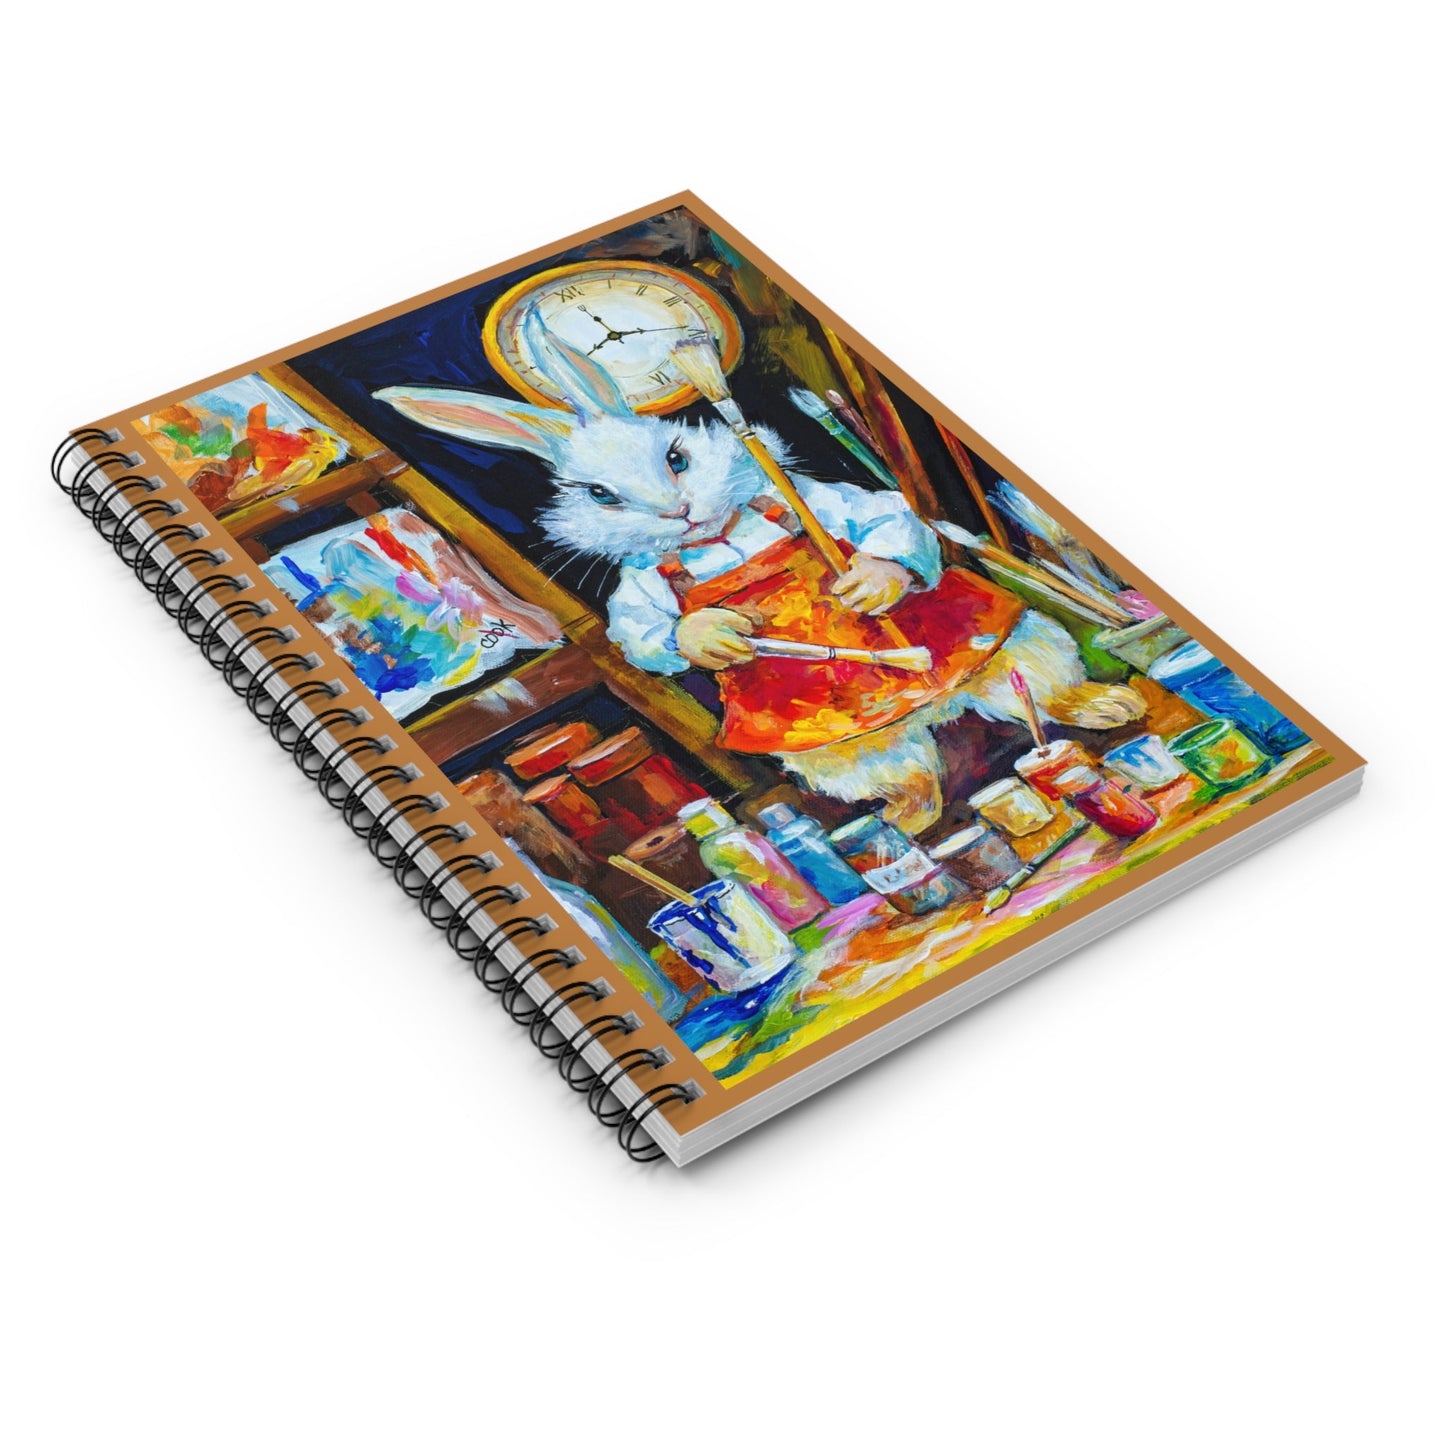 Blossom Bunny Artistic - Spiral Journal / Notebook Ginger's Art and Gift Shop